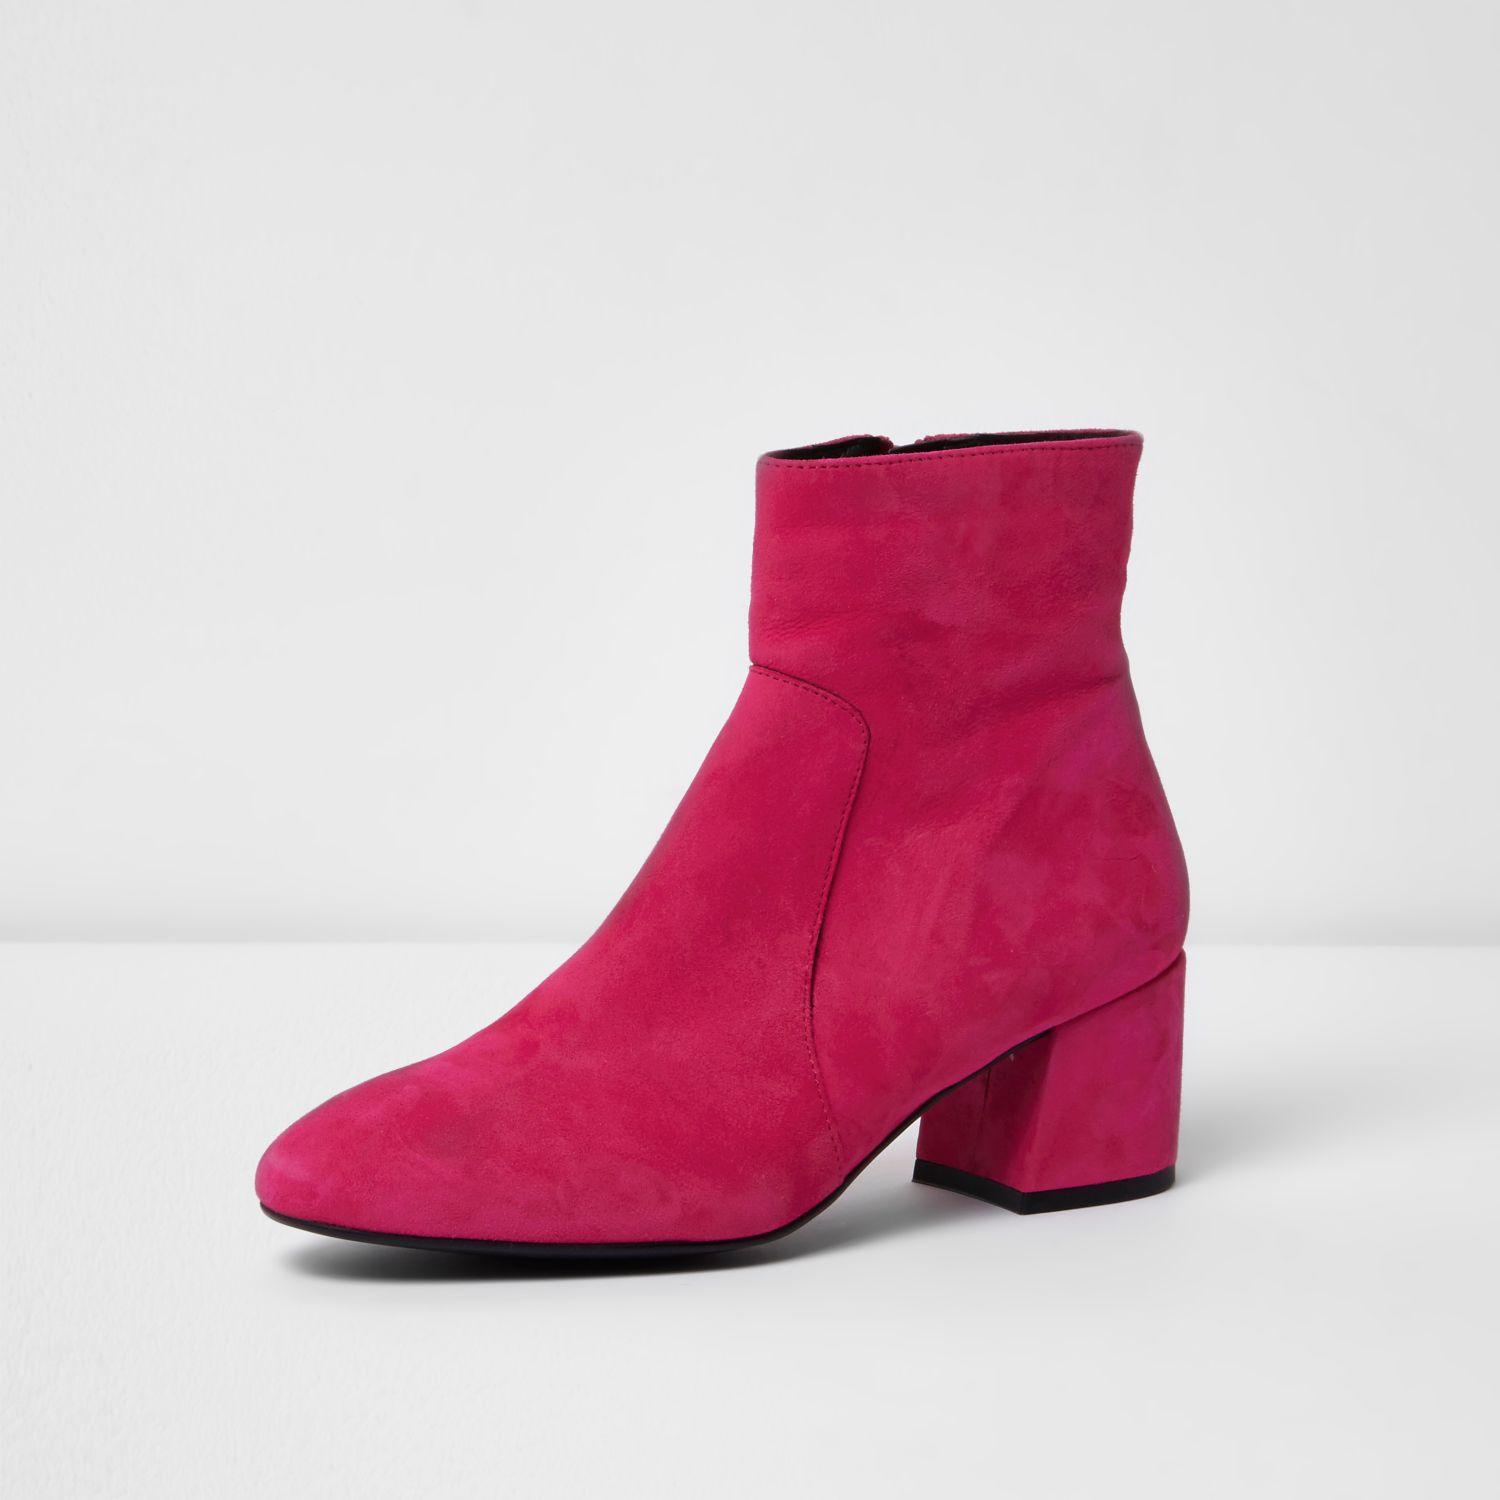 River Island Bright Pink Suede Block Heel Ankle Boots - Lyst